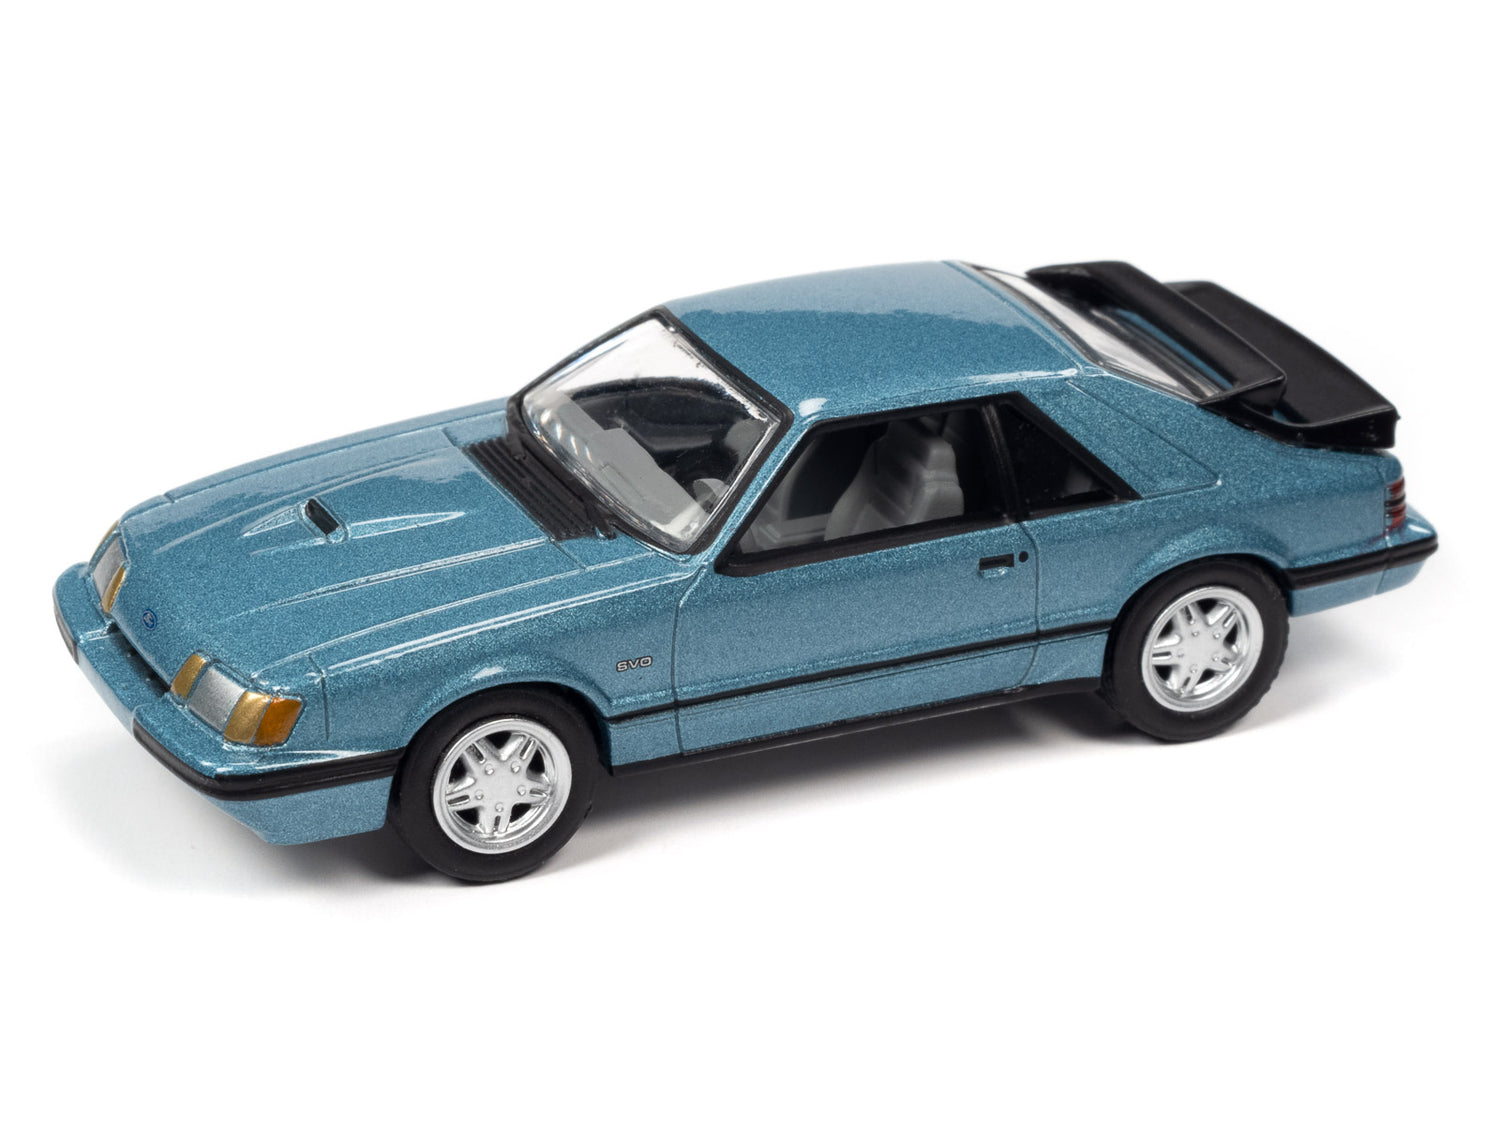 Light regatta blue Mustang SVO in classic gold collection Version A